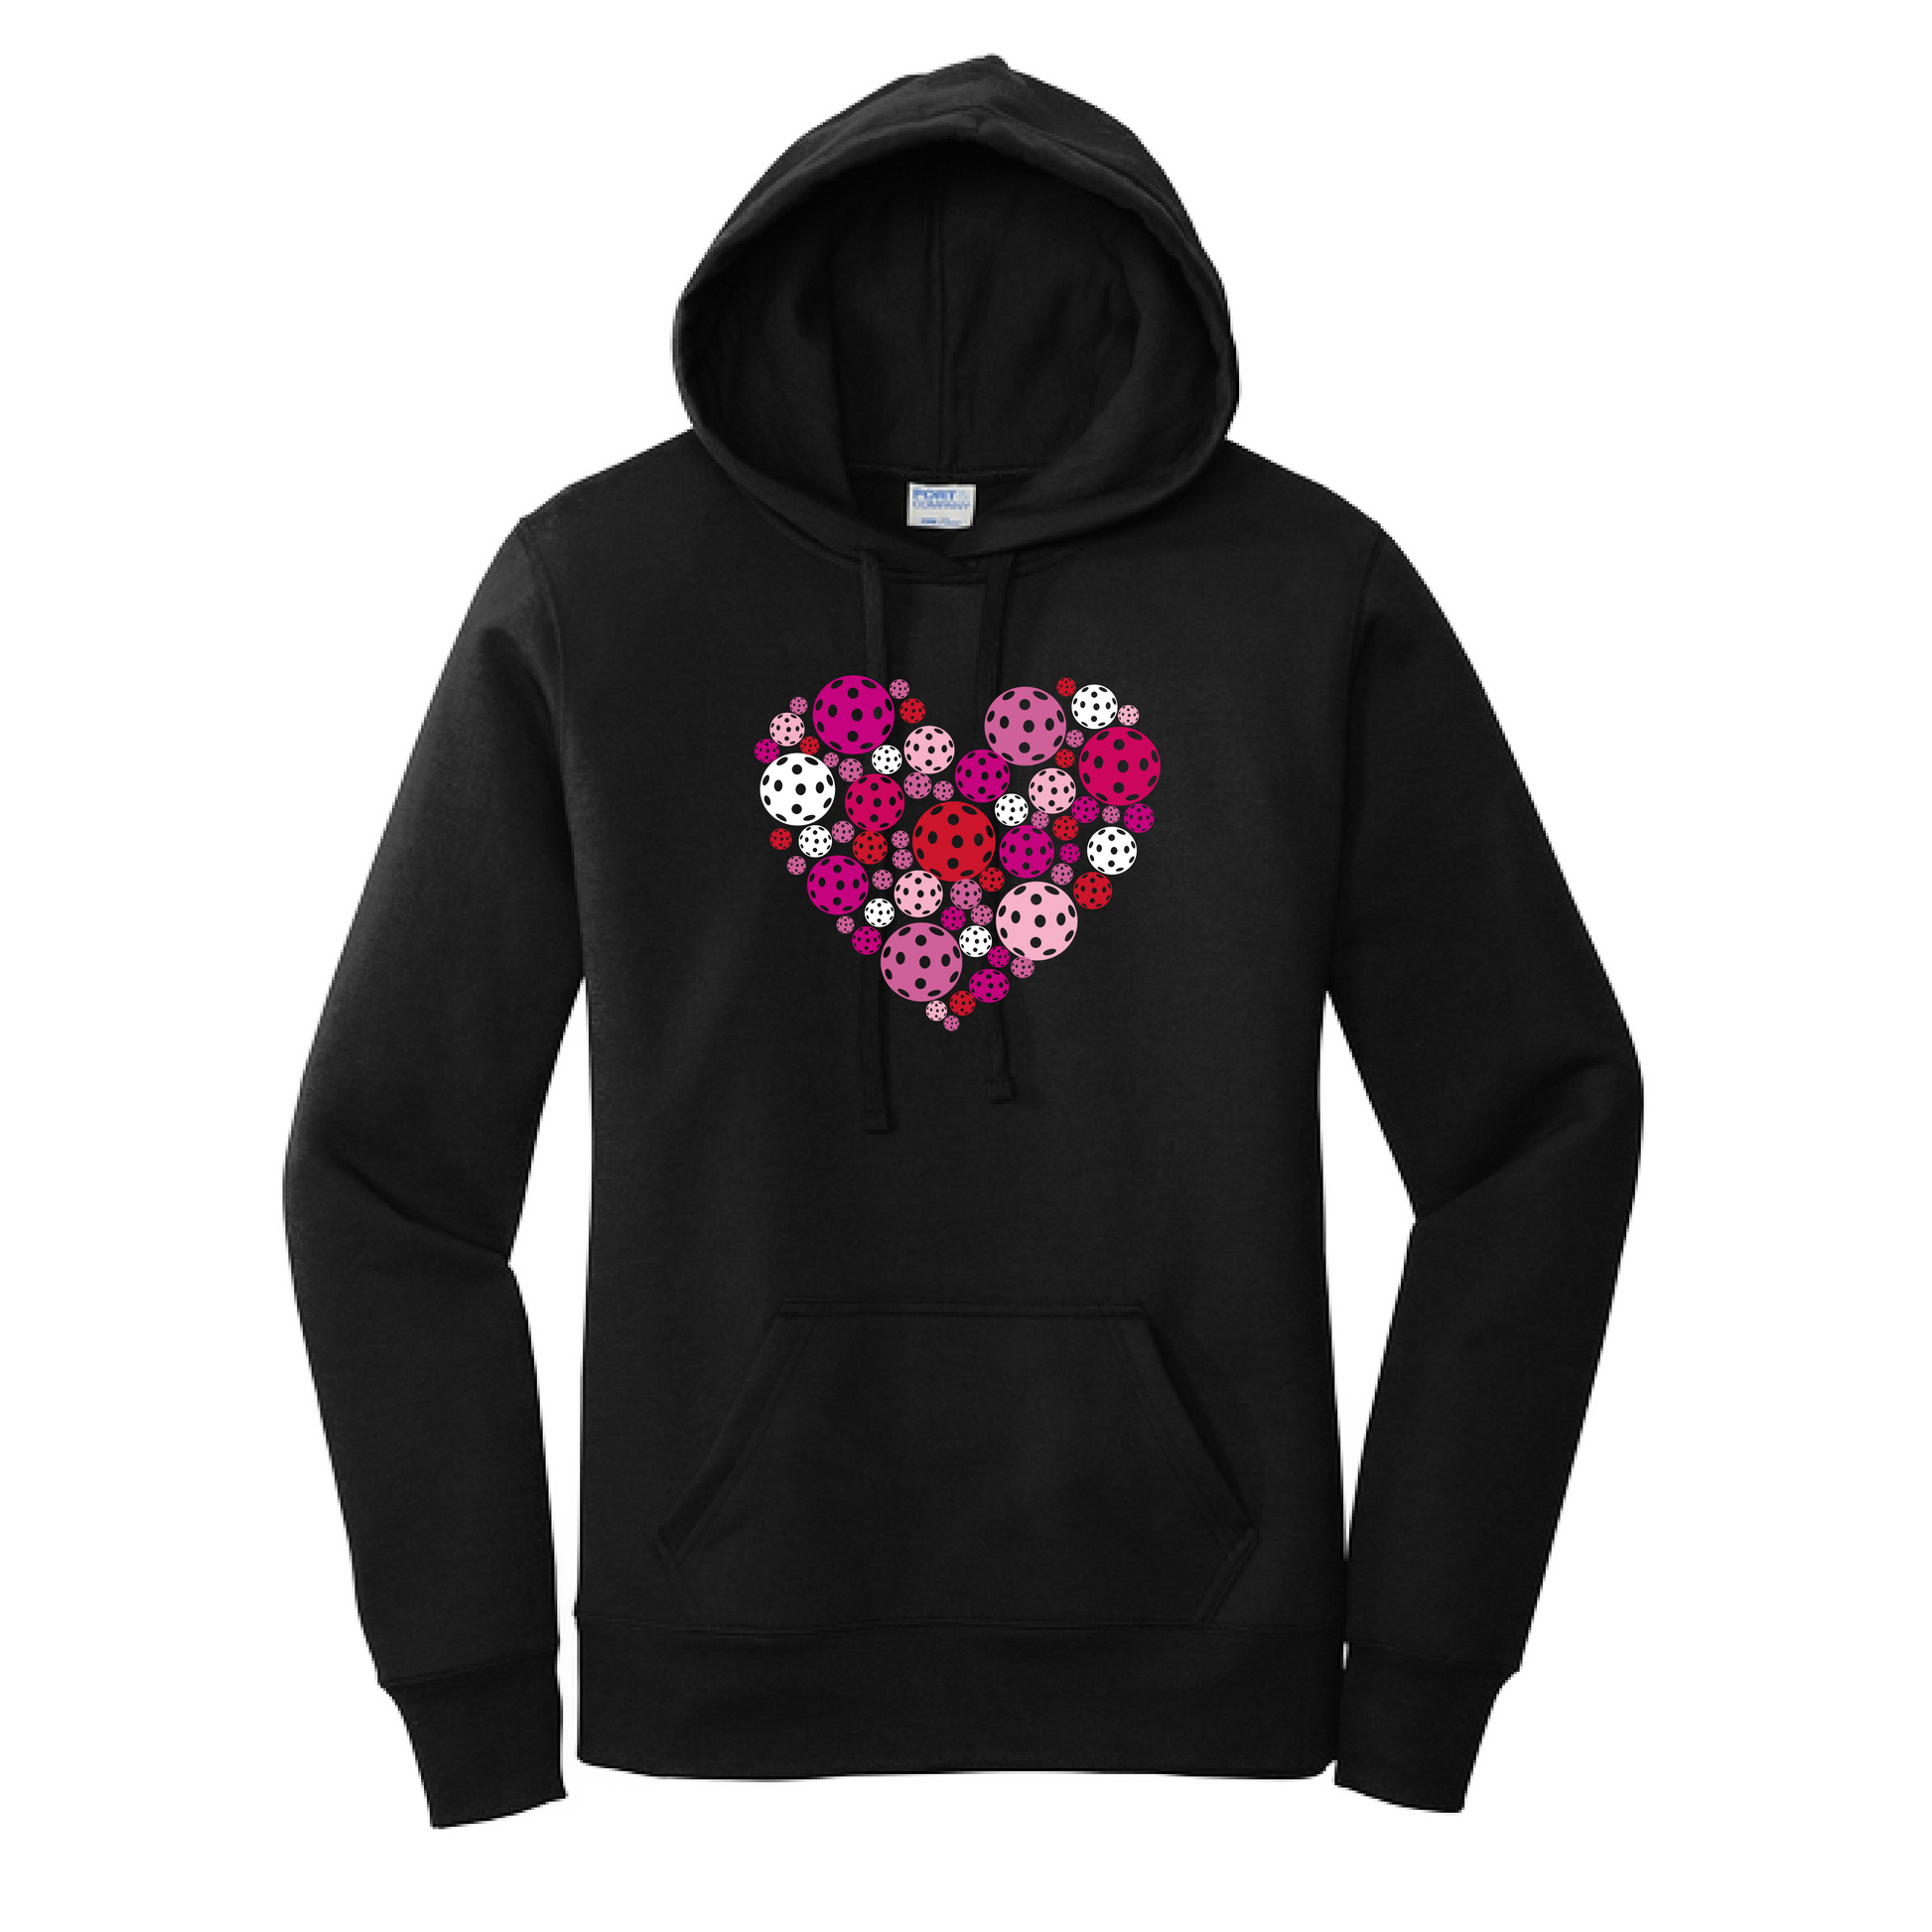 This Women's Fitted Hoodie Sweatshirt will have you cranking up the style! Crafted from a 50/50 Cotton/Poly blend, the ultra-soft lined interior and cozy hood will keep you comfy while the front pouch pocket amps up your look. Show off your figure in style.